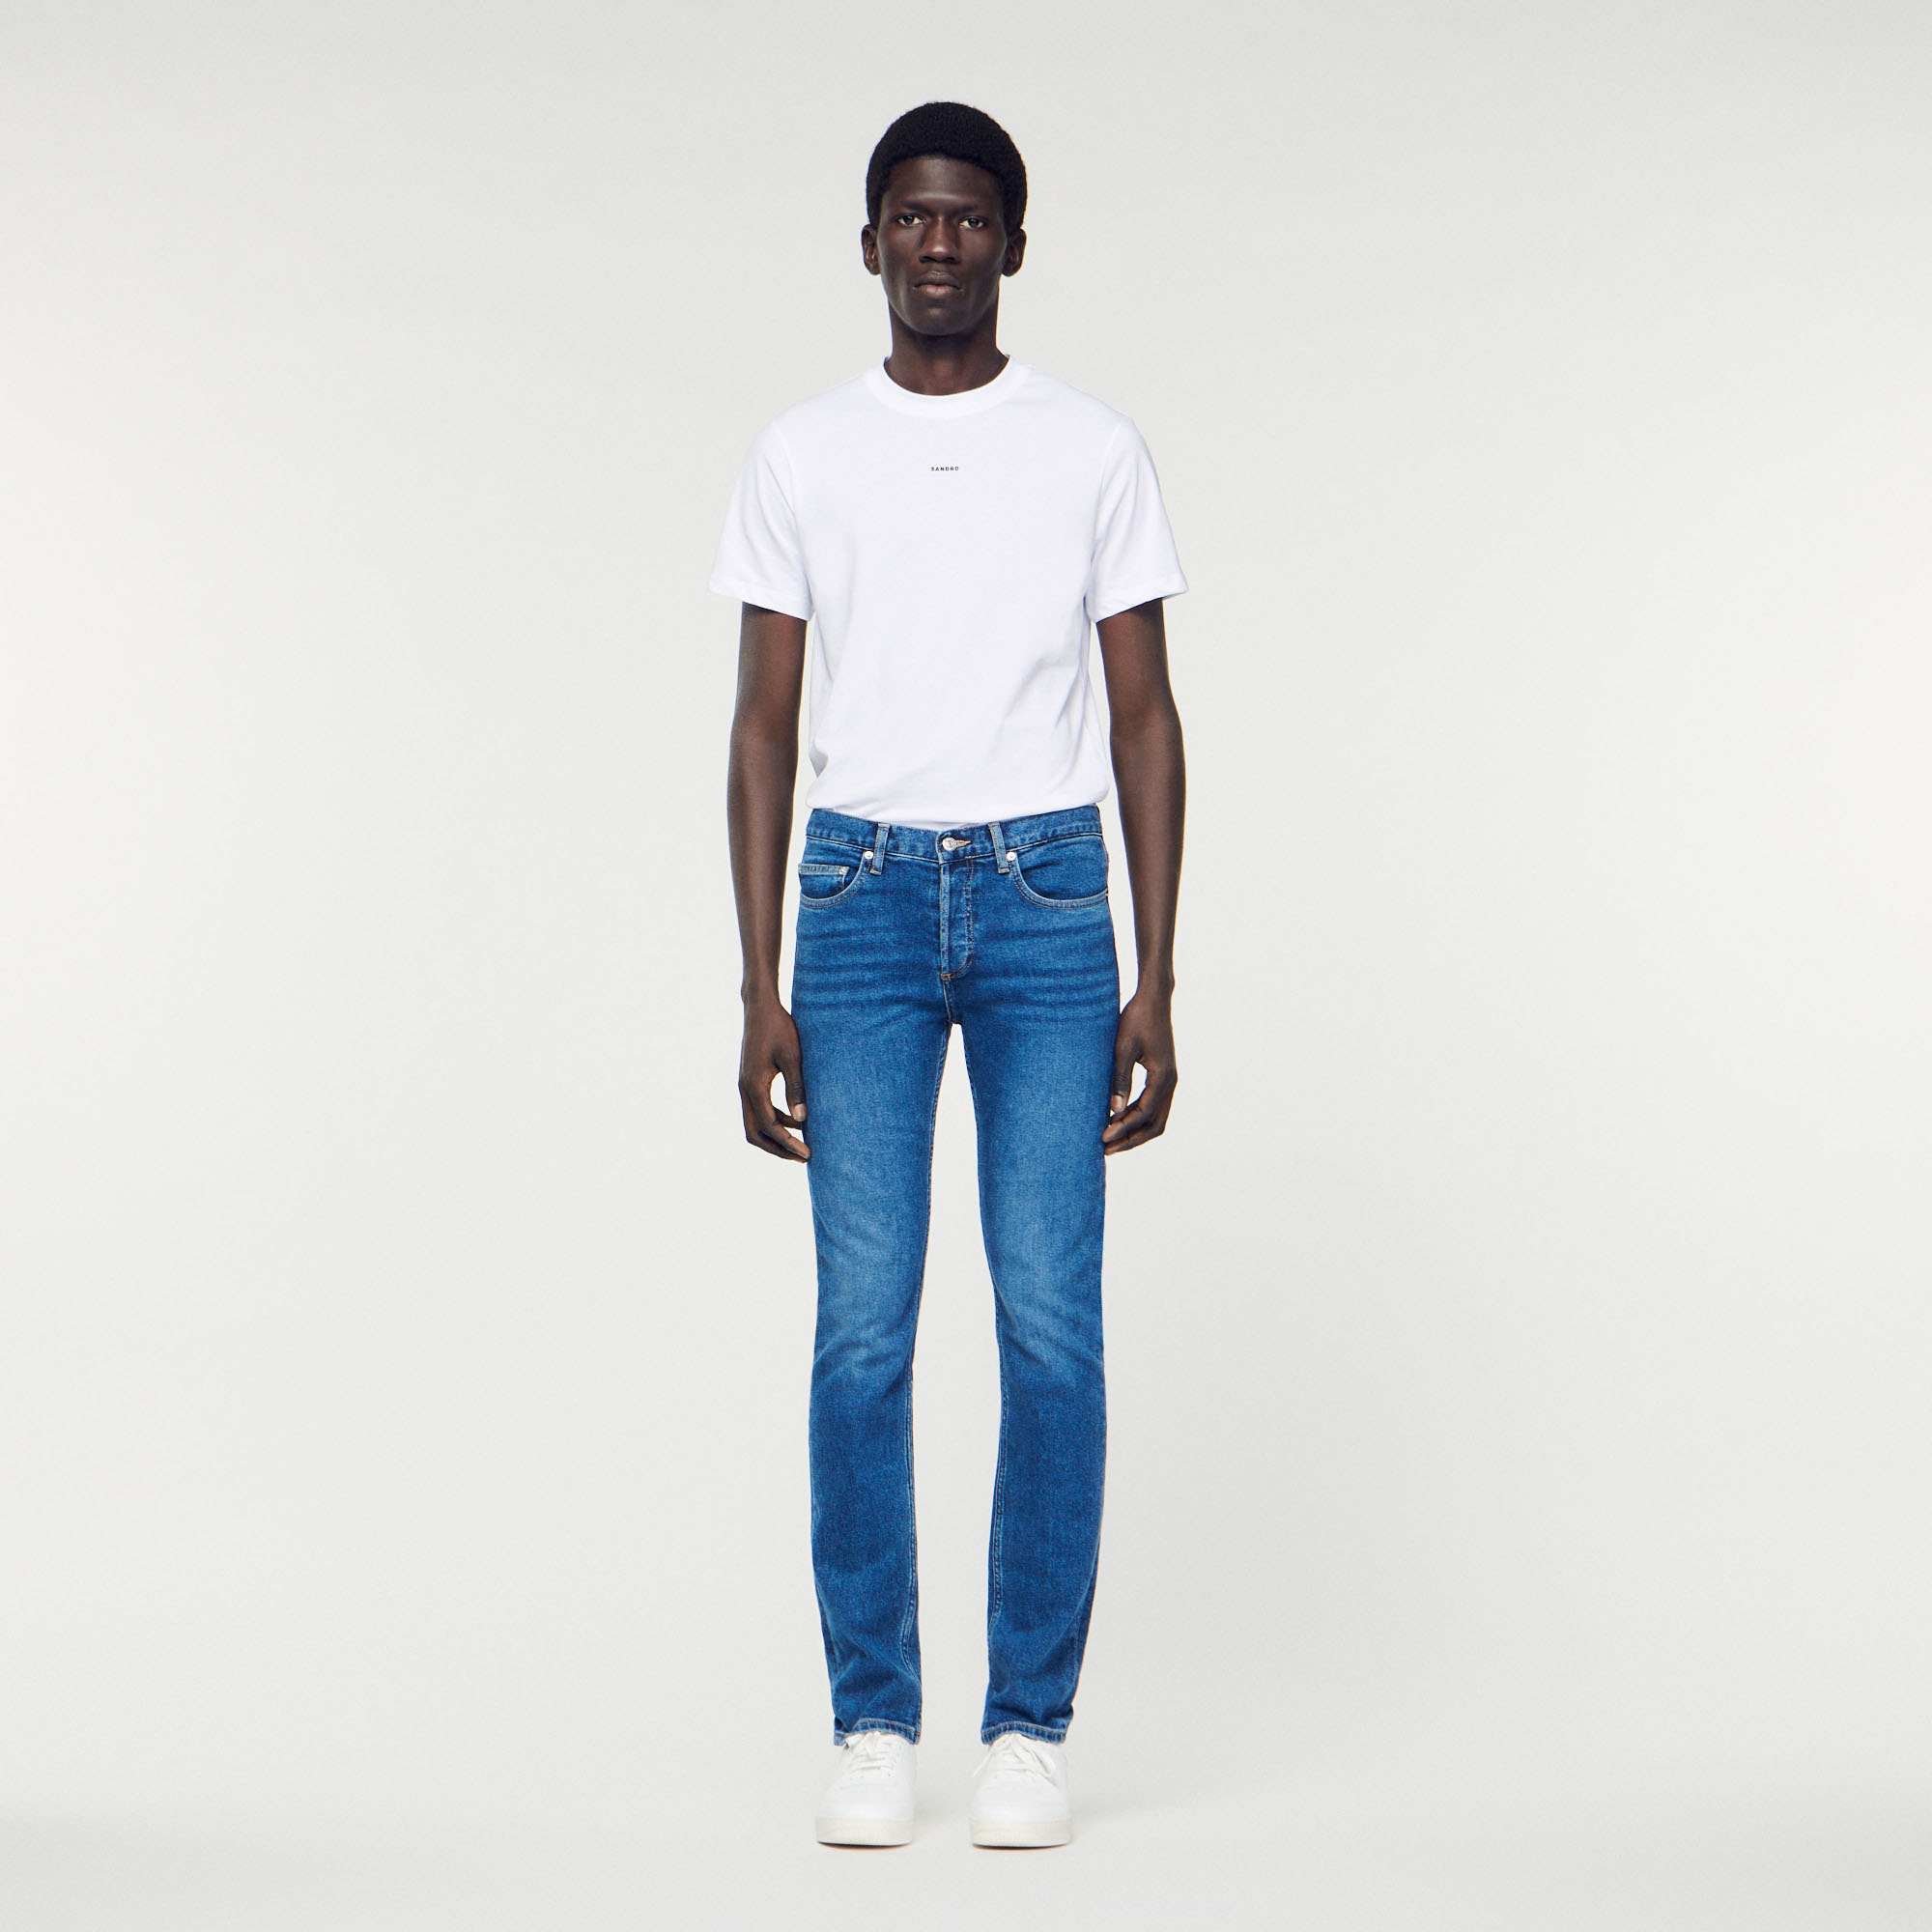 Sandro cotton Washed jeans - Slim cut